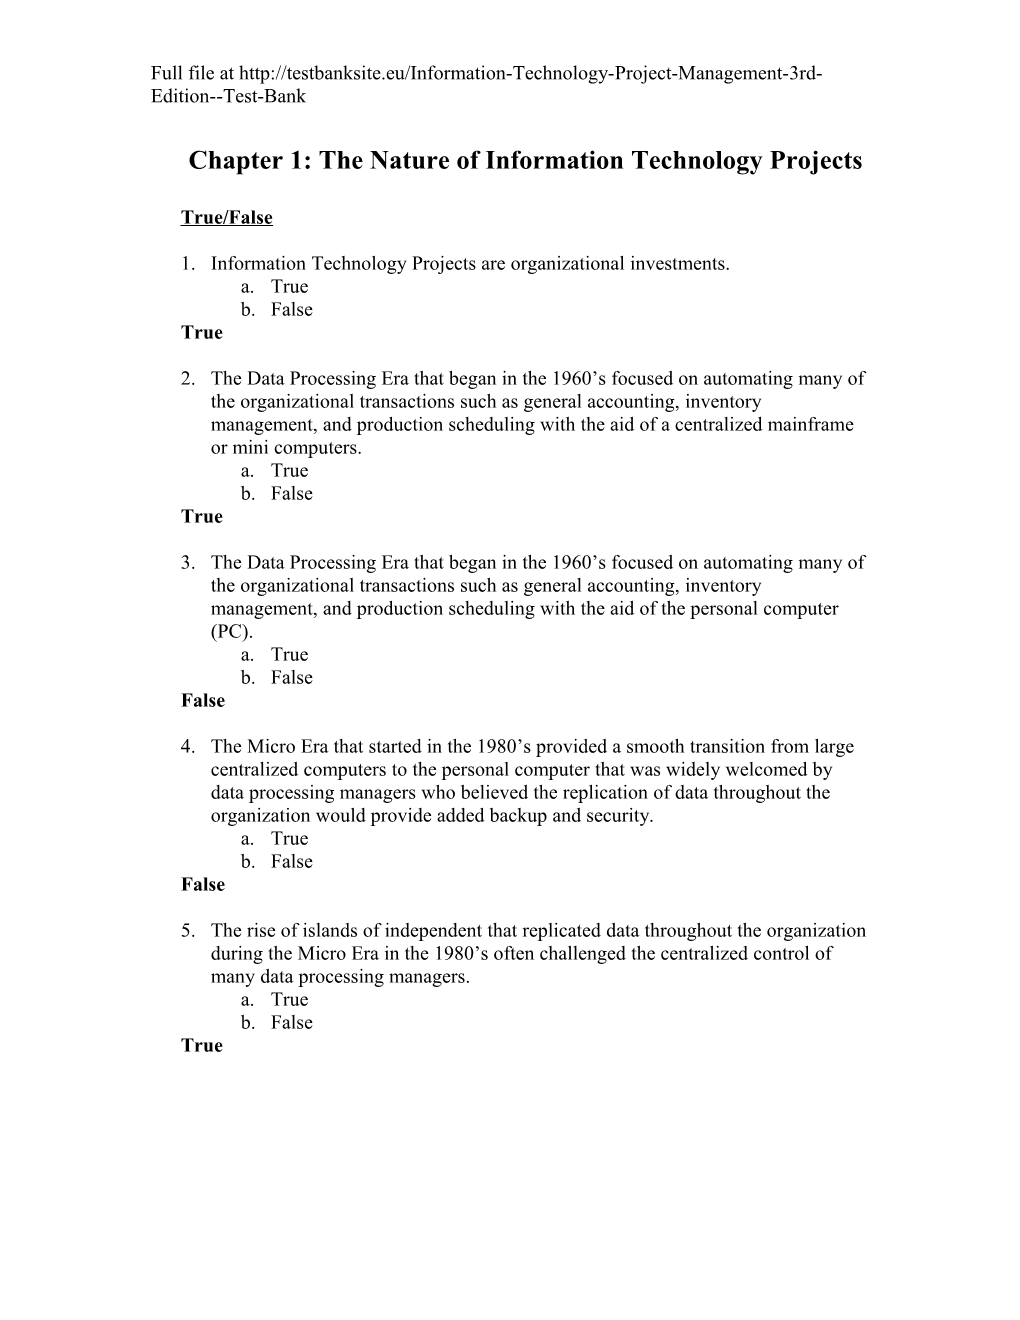 Chapter 1: the Nature of Information Technology Projects